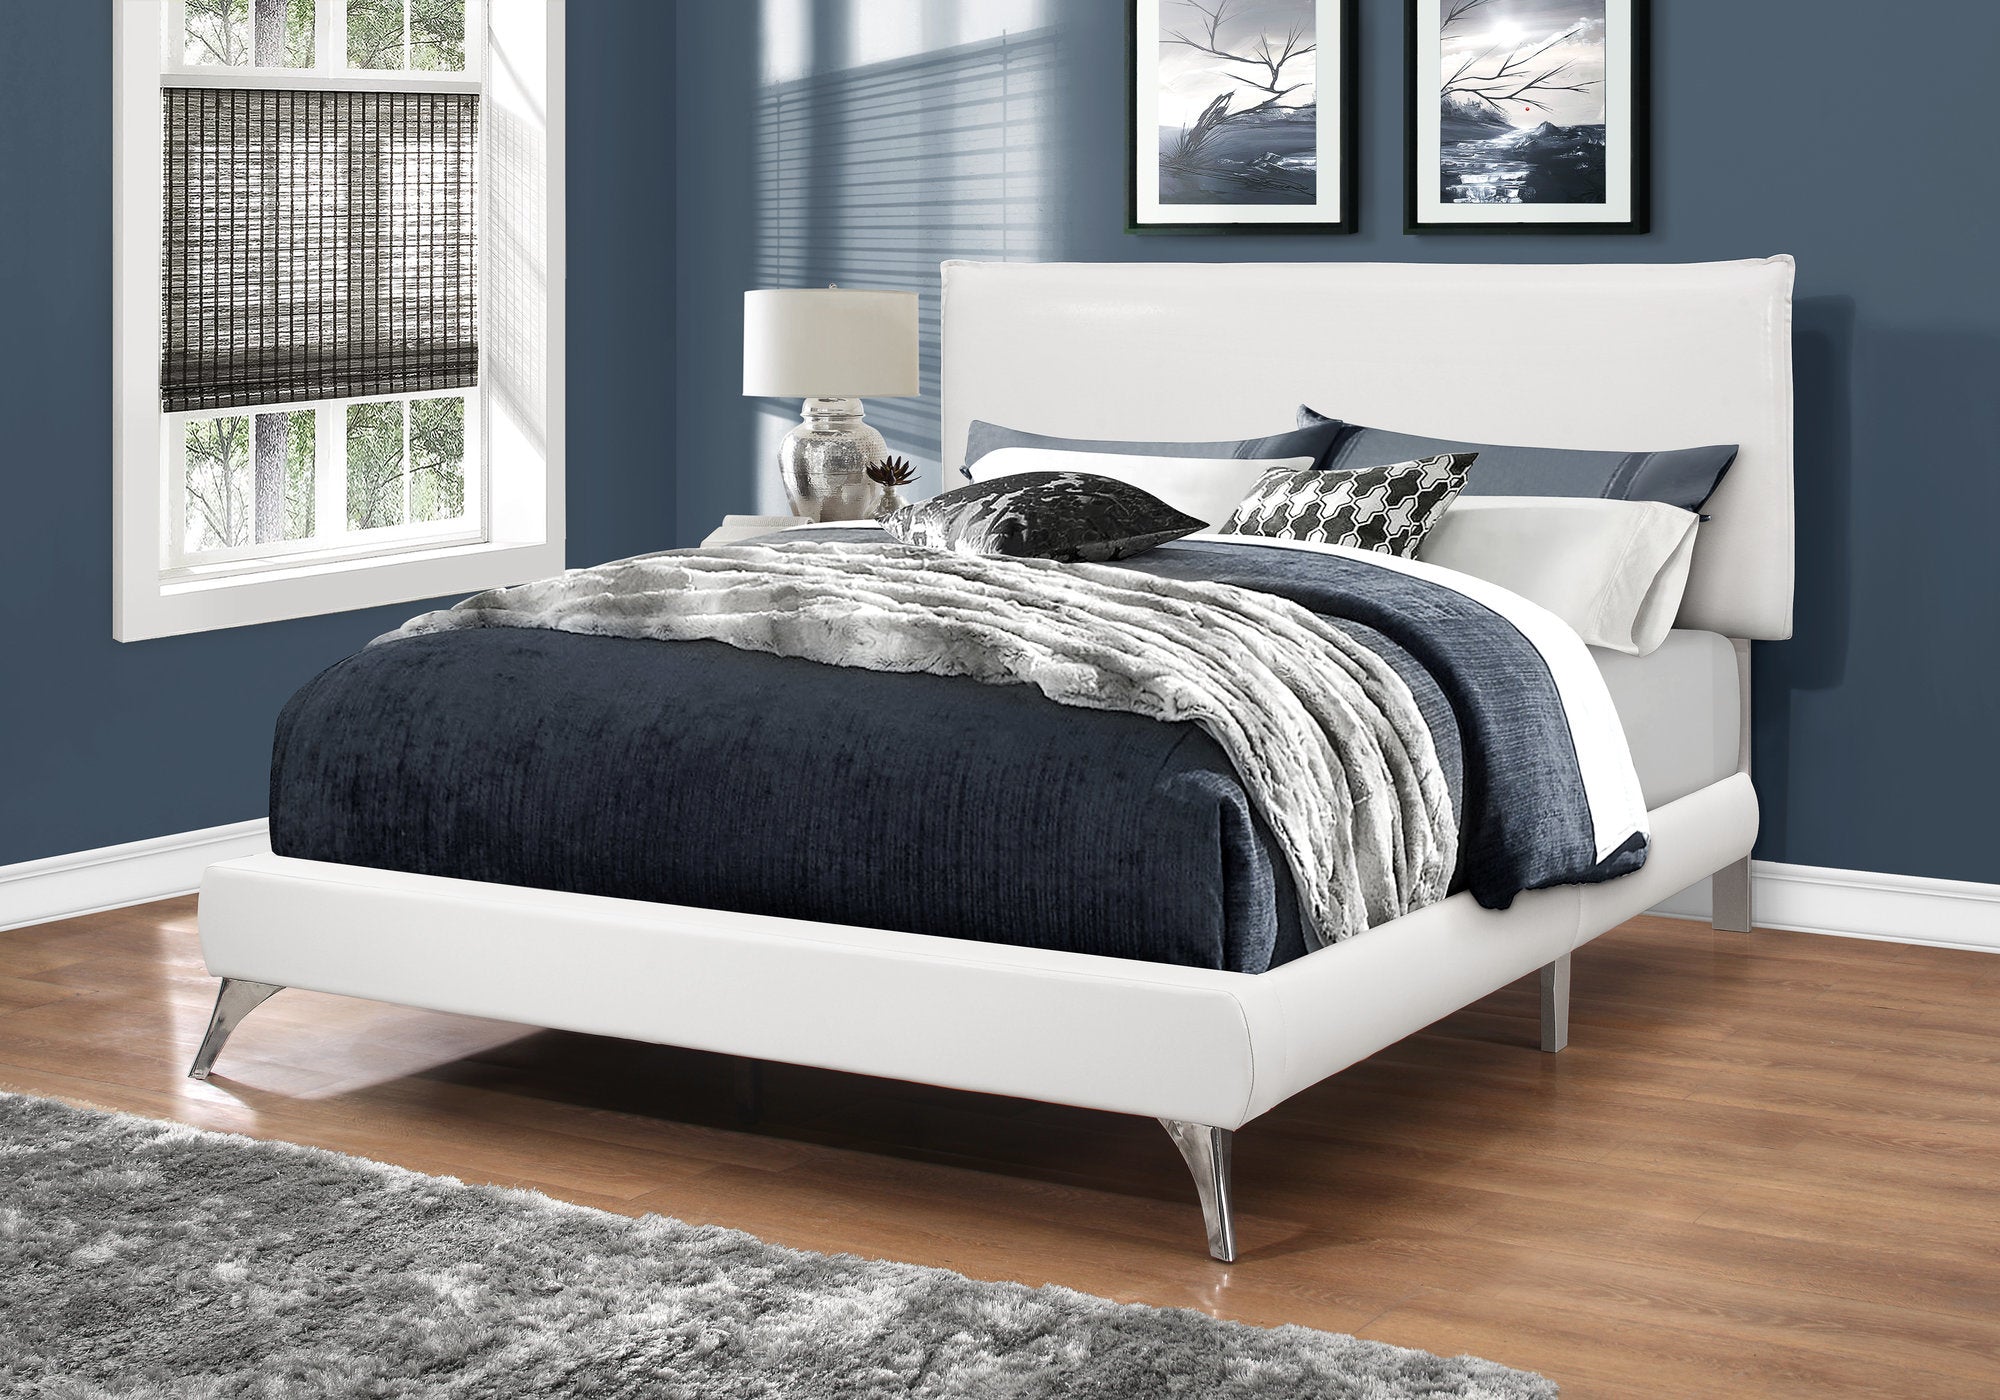 MN-165953Q    Bed, Frame, Platform, Bedroom, Queen Size, Upholstered, Linen Look Fabric, Metal Legs, White, Chrome, Contemporary, Modern